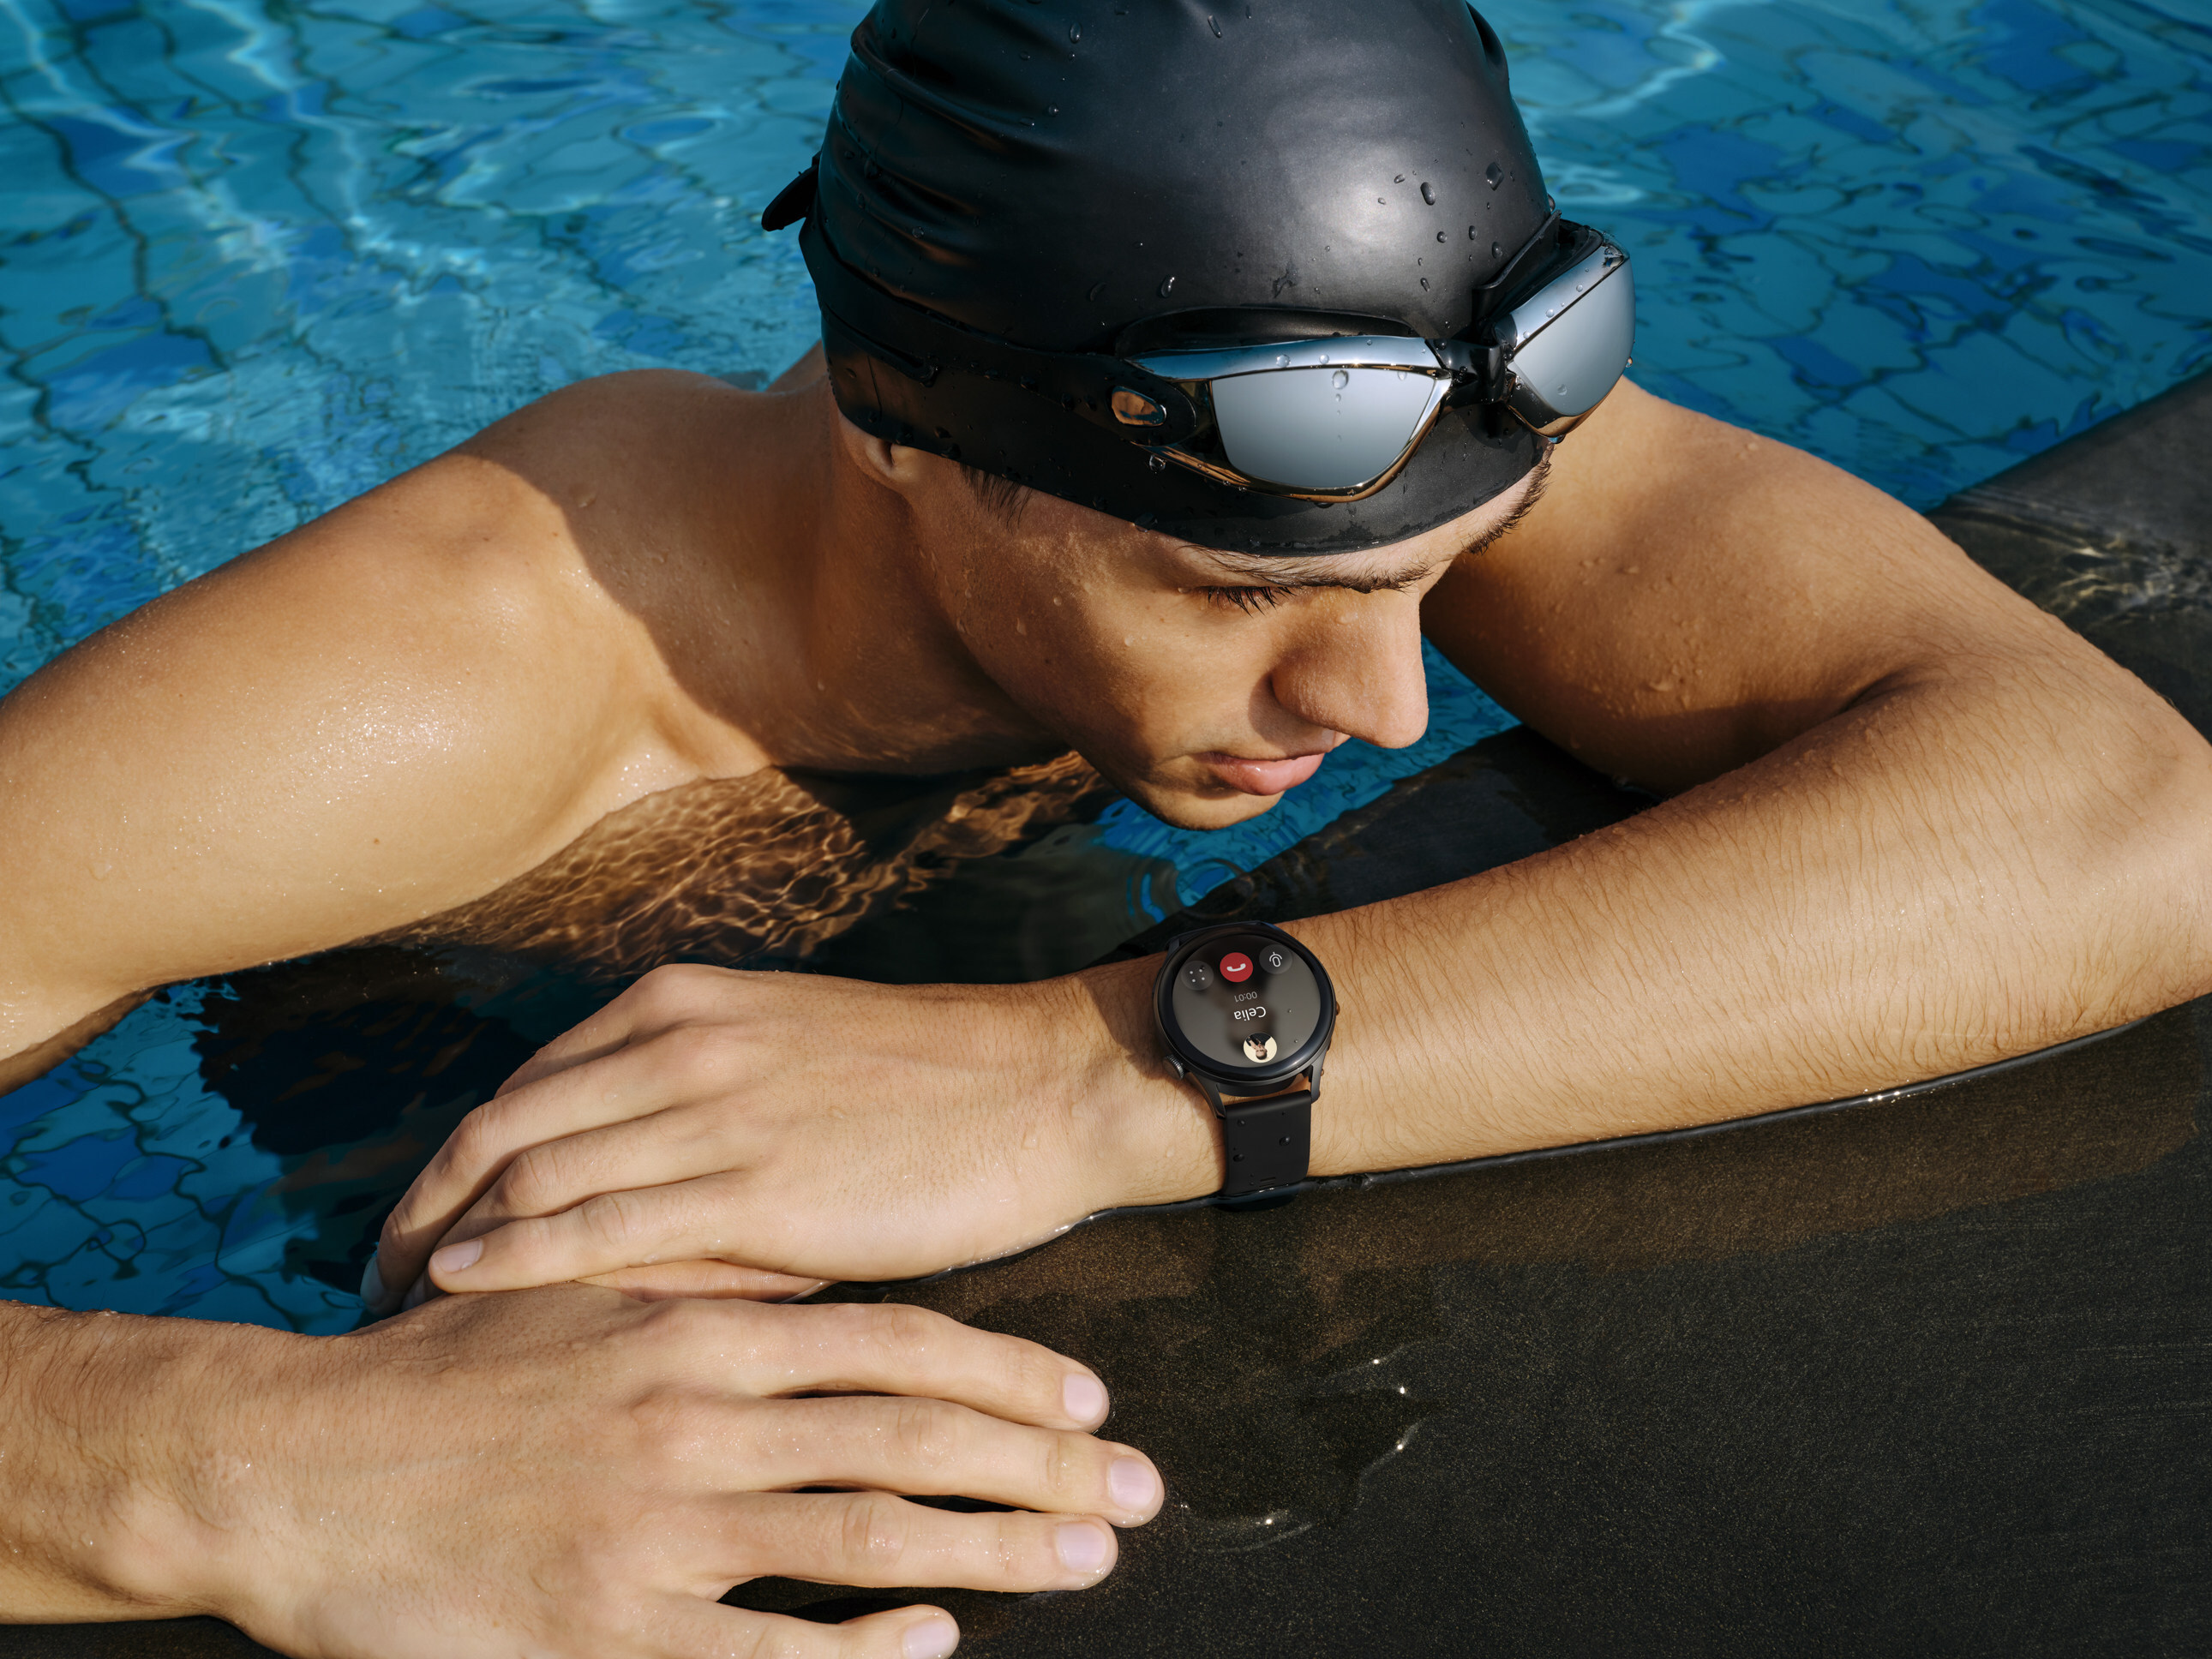 The Huawei Watch 3 Pro is the latest smartphone from Huawei that is perfect to use at the beach or pool. Photo: Huawei